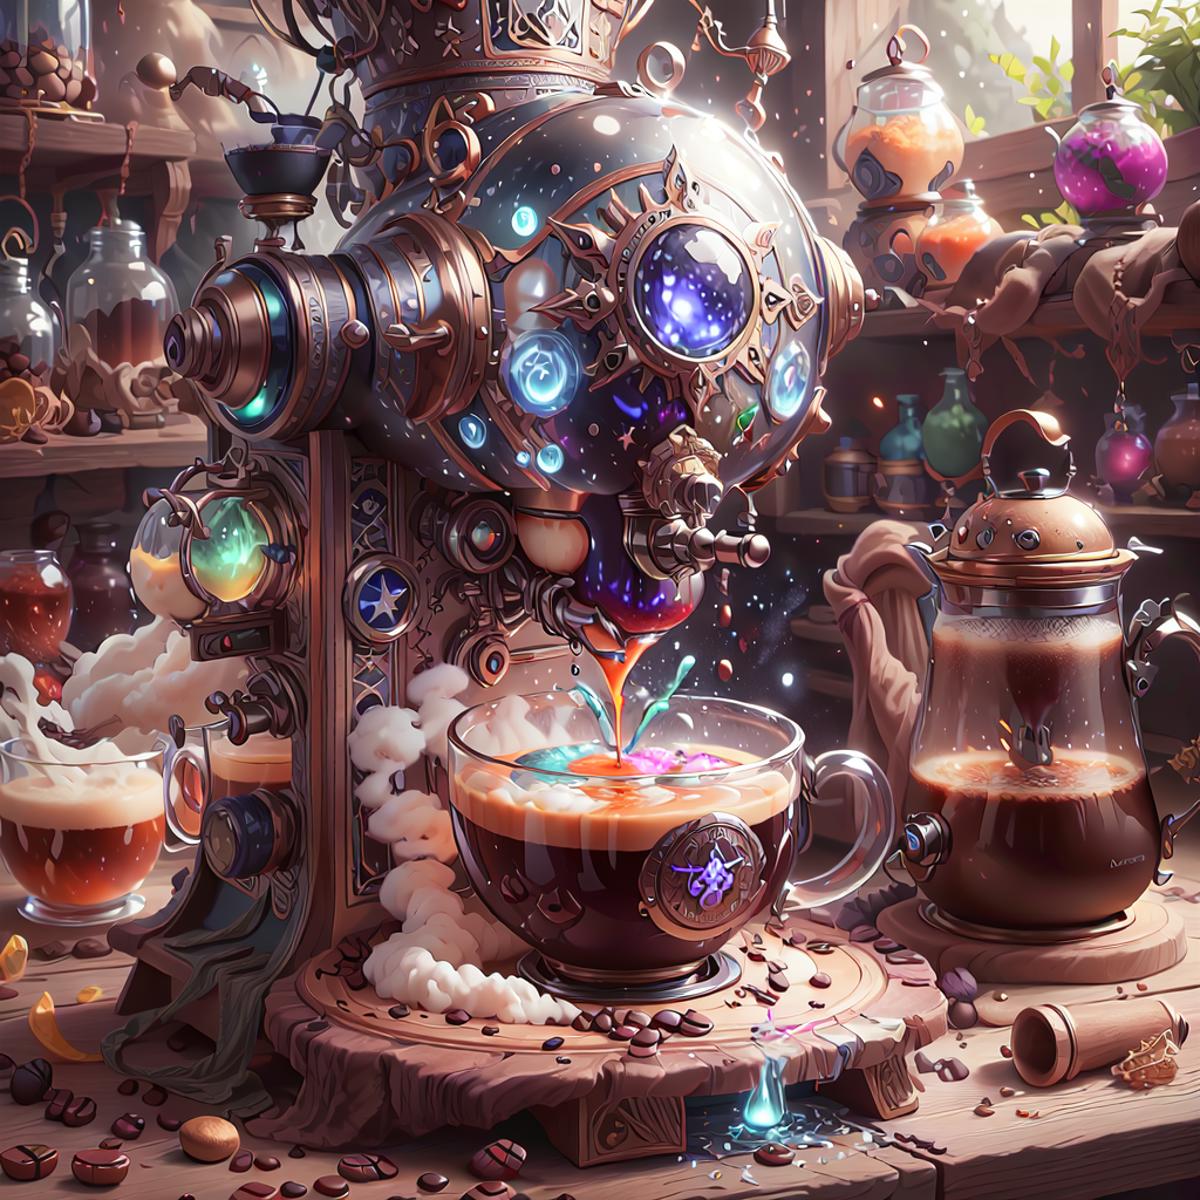 Fantasy Steampunk-Inspired Coffee Maker with Alchemical Elements and Potions, with a Cup of Coffee.